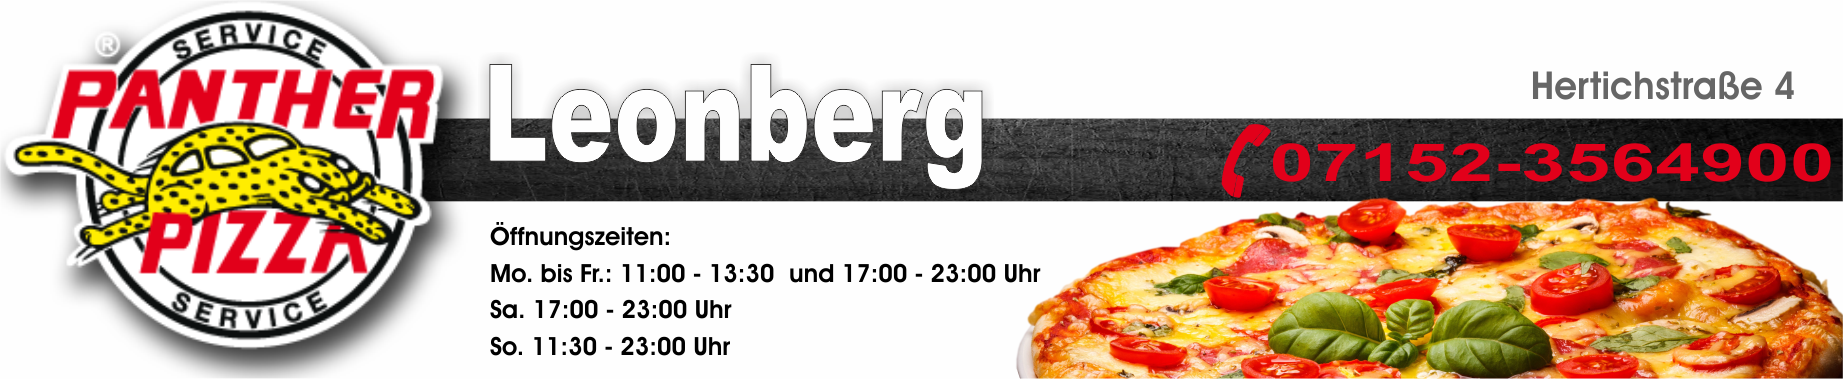 Panther Pizza Leonberg